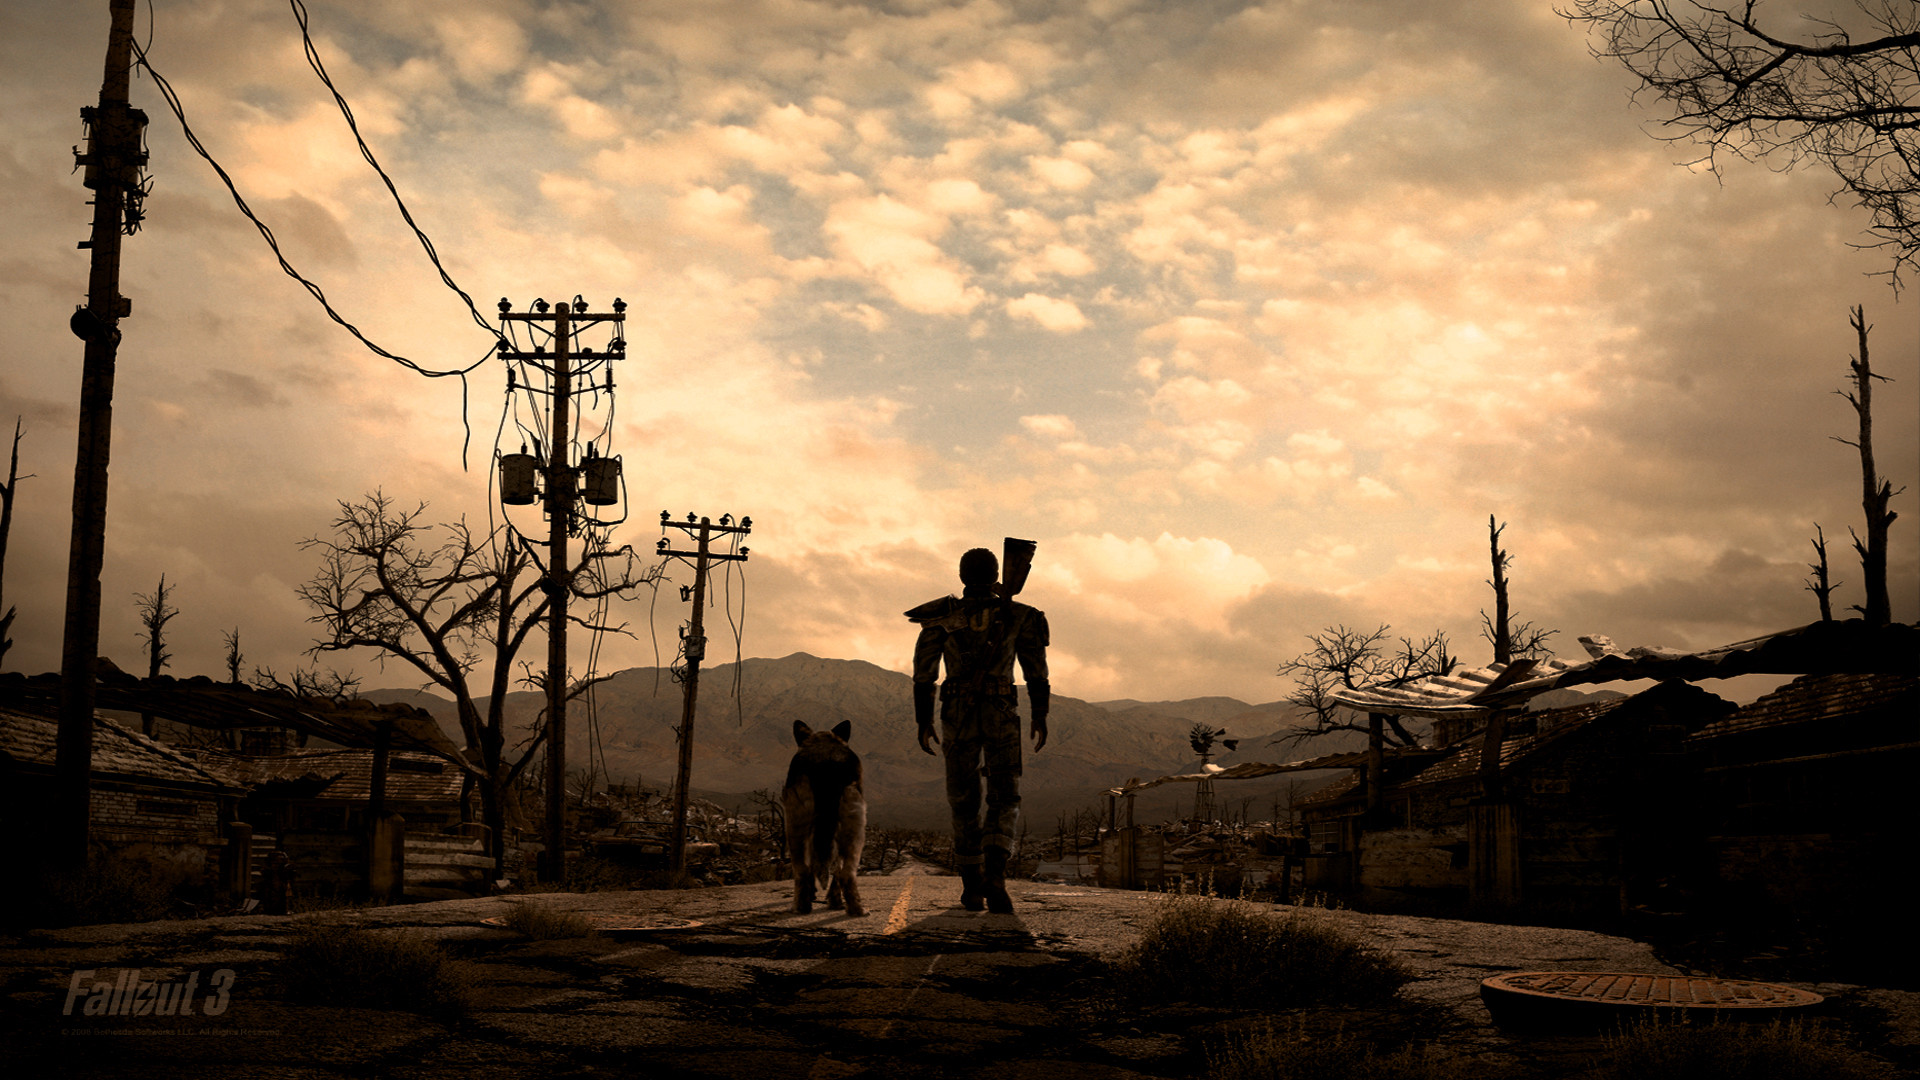 1920x1080 Fallout 3 Wallpaper Hd - HD Wallpapers Ultra - Page 3 of 4